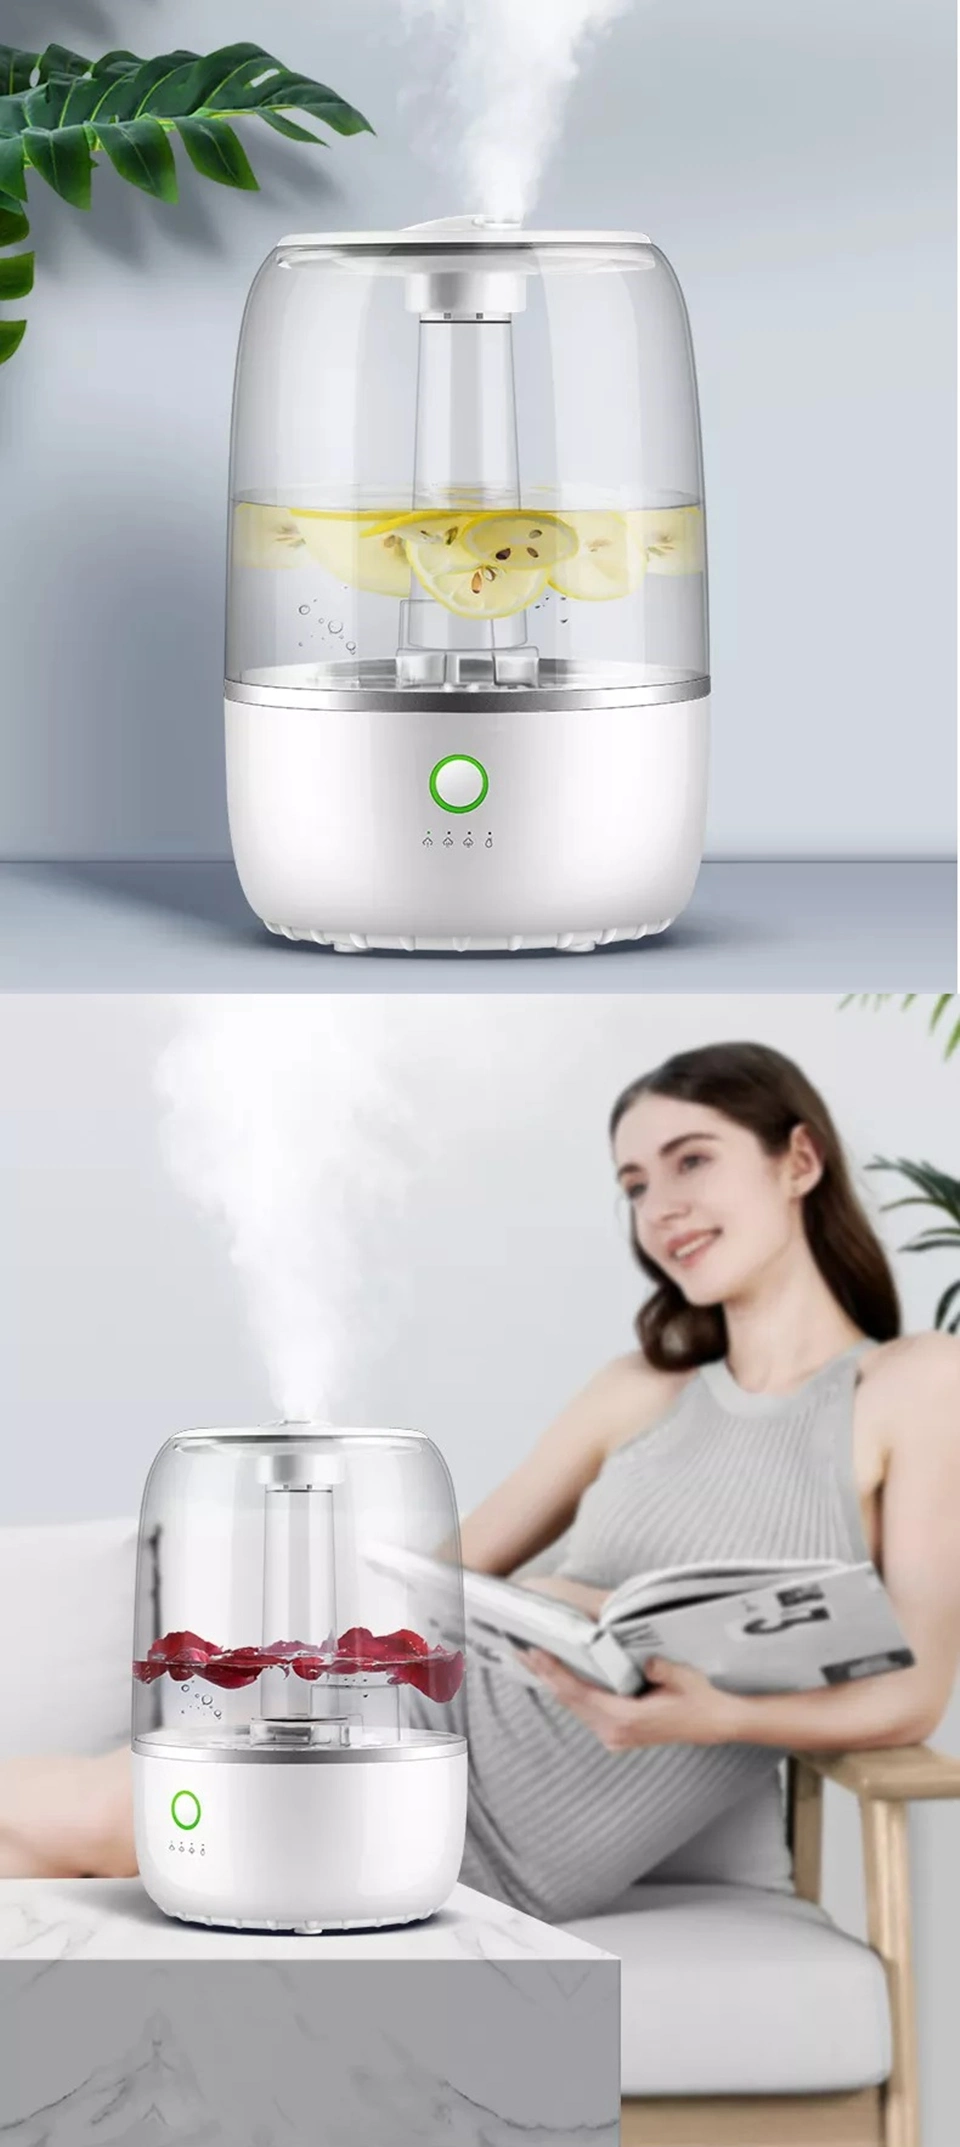 4L Capacity Home Floor Cool Mist for Bedroom Living Room Office Air Disinfect Industrial Ultrasonic Humidifier Aroma Diffuser